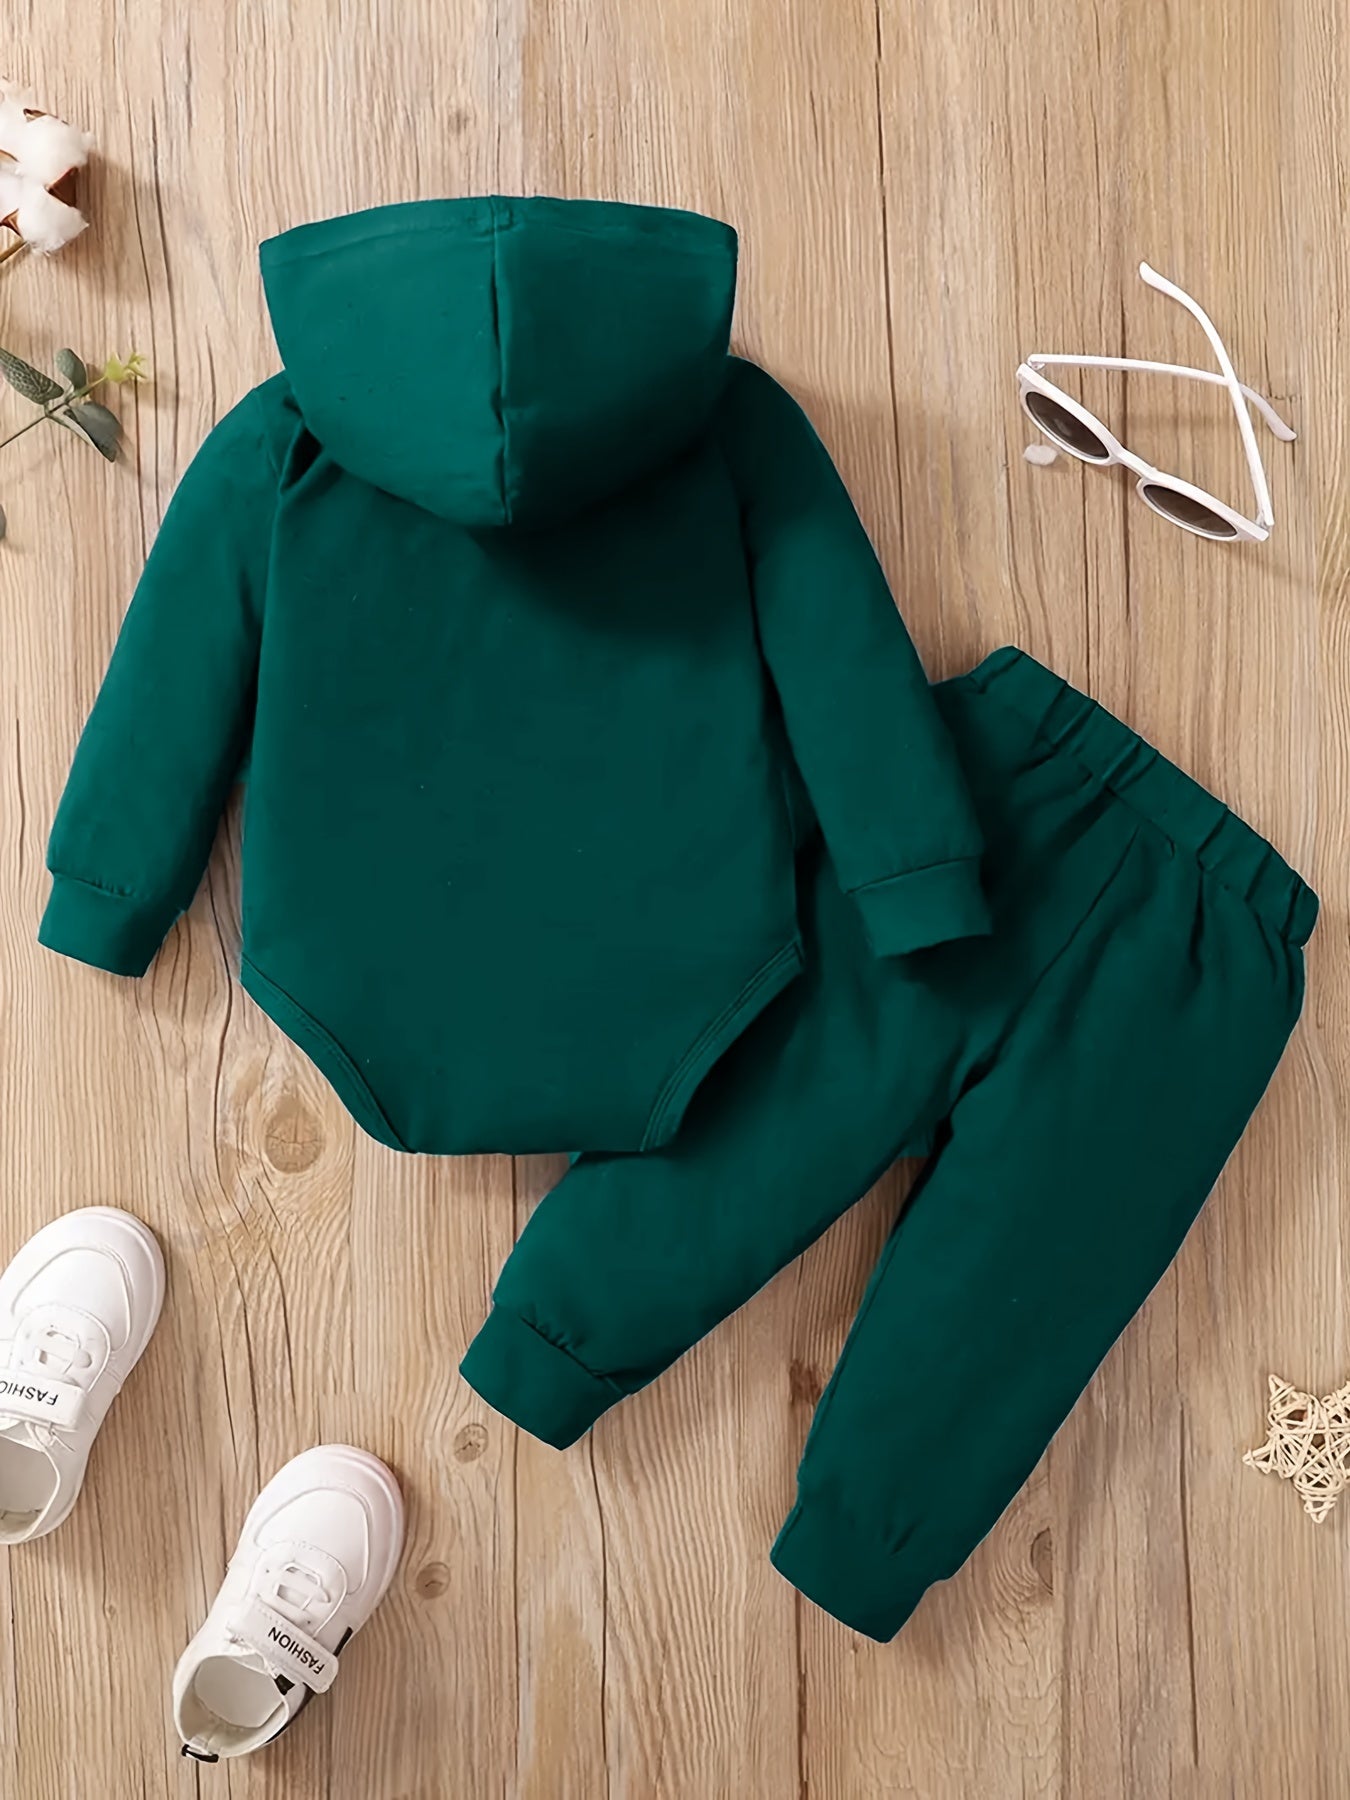 Trendy Hooded Long-sleeved Letter Print Bodysuit + Trousers Set, Baby Boy's Spring And Autumn Outfit